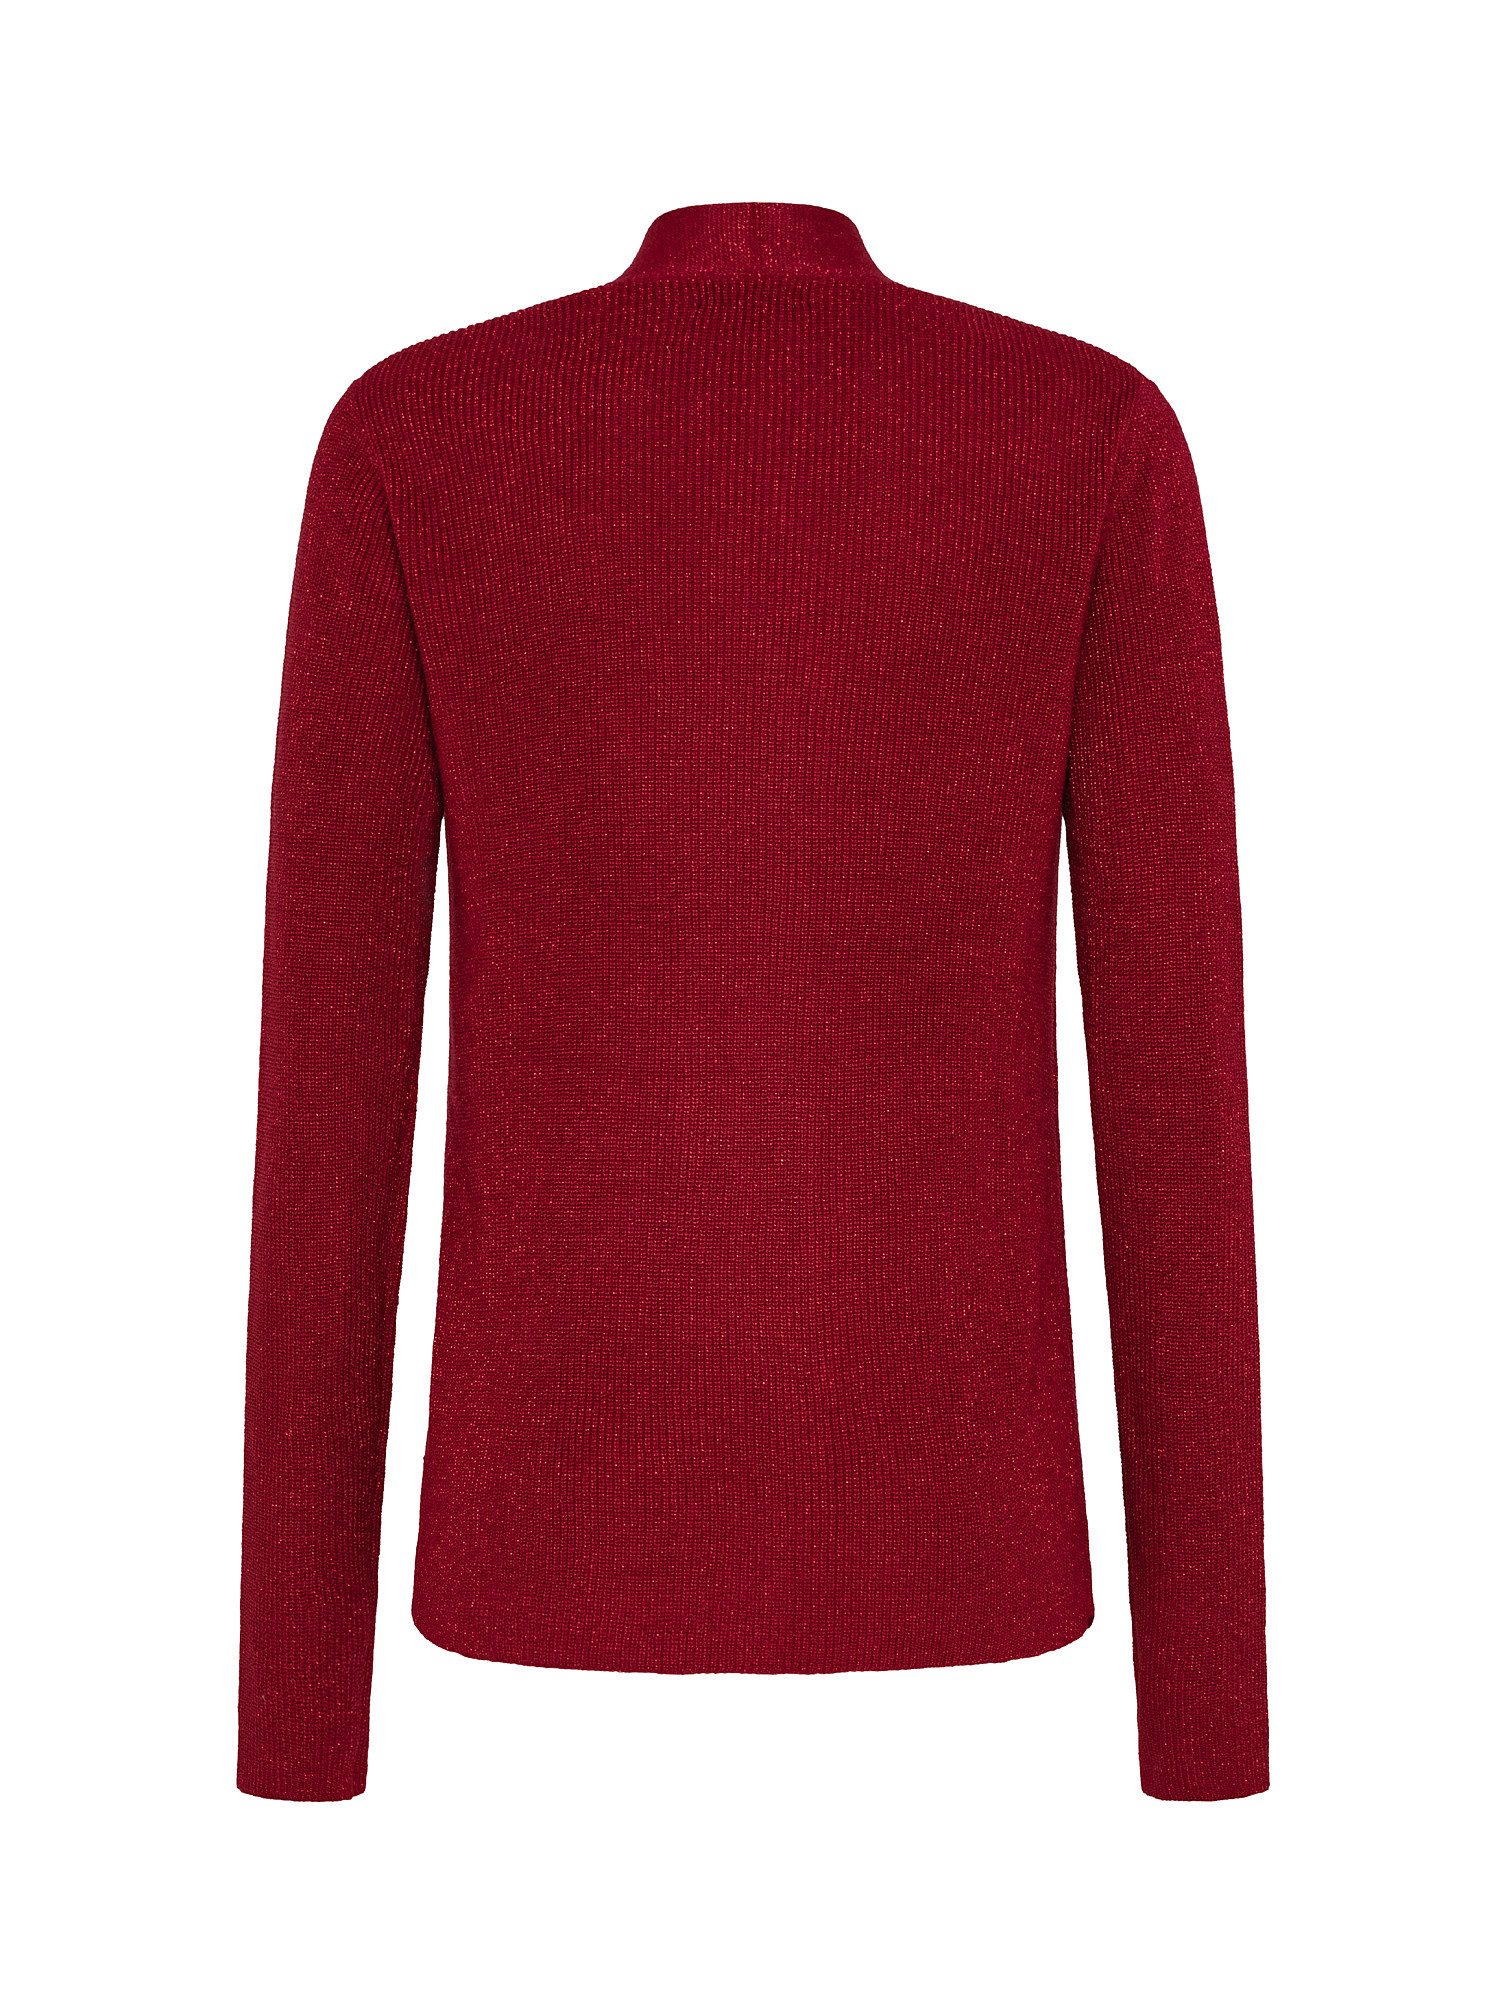 Knitted cardigan, Red, large image number 1